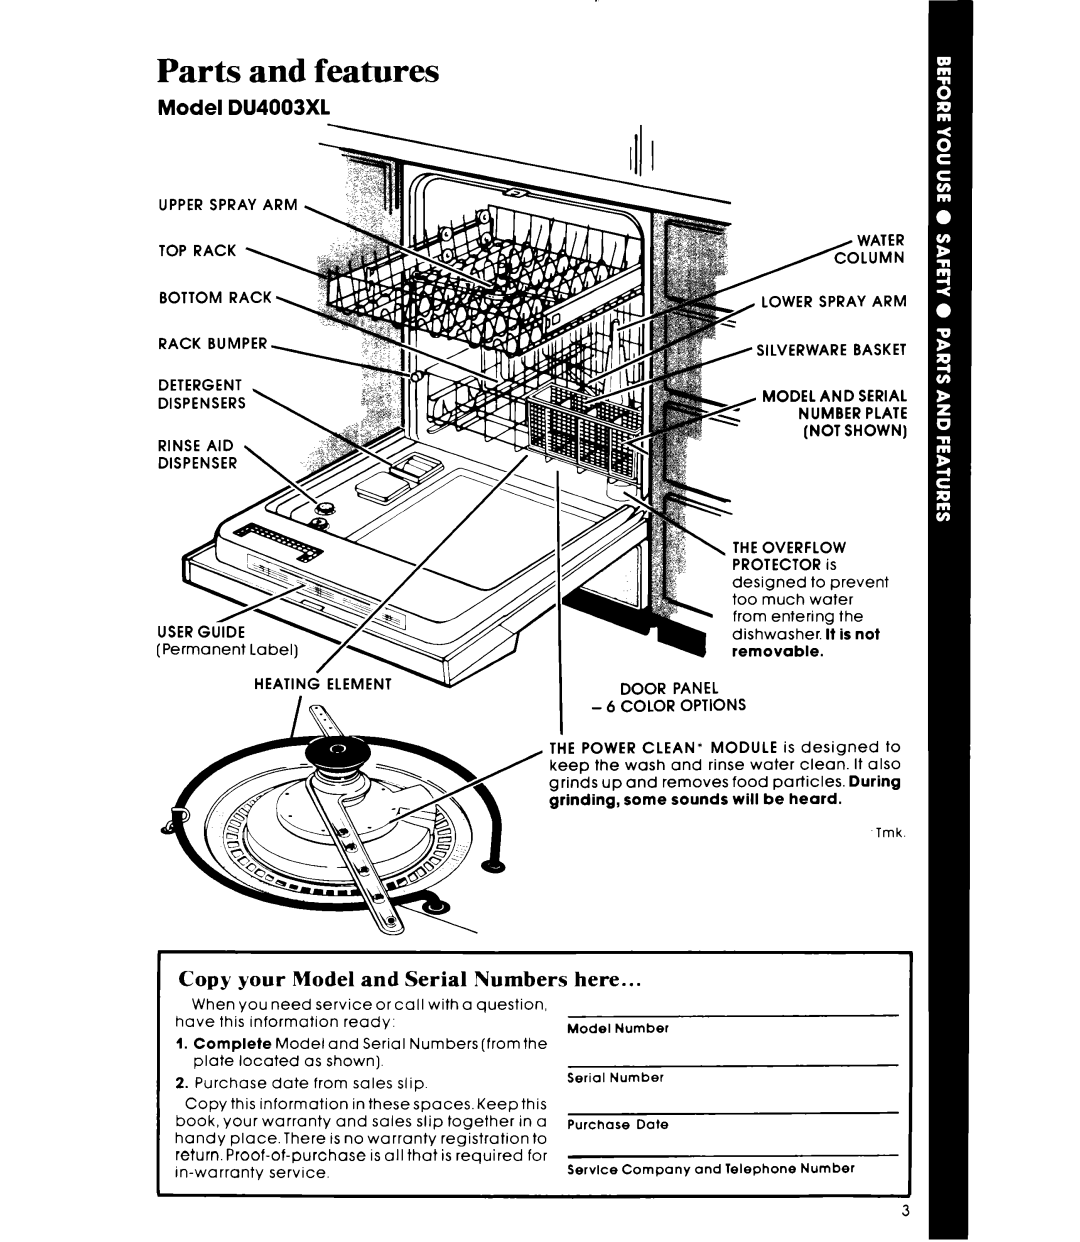 Whirlpool manual Parts and features, Model DU4003XL, Copy your Model and Serial Numbers, here 